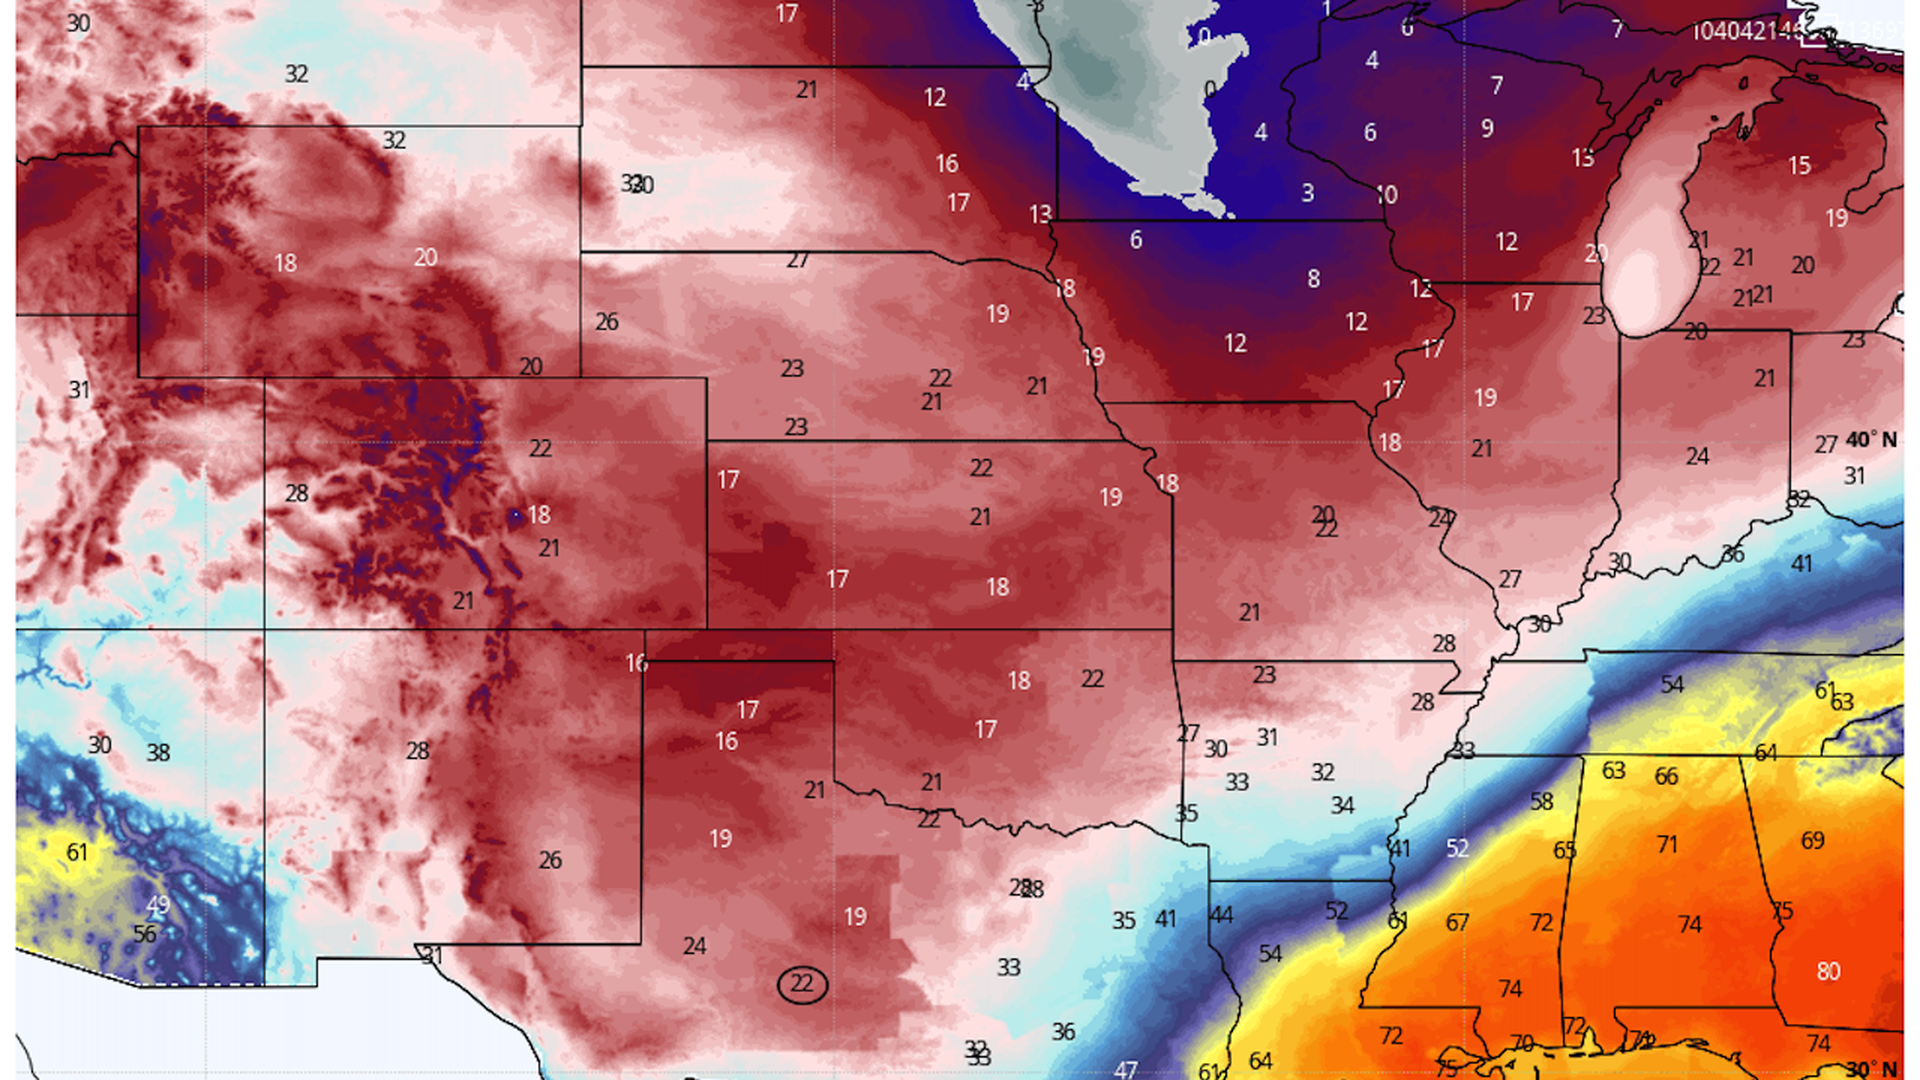 Animated image showing low temperatures across a drawing of the U.S.